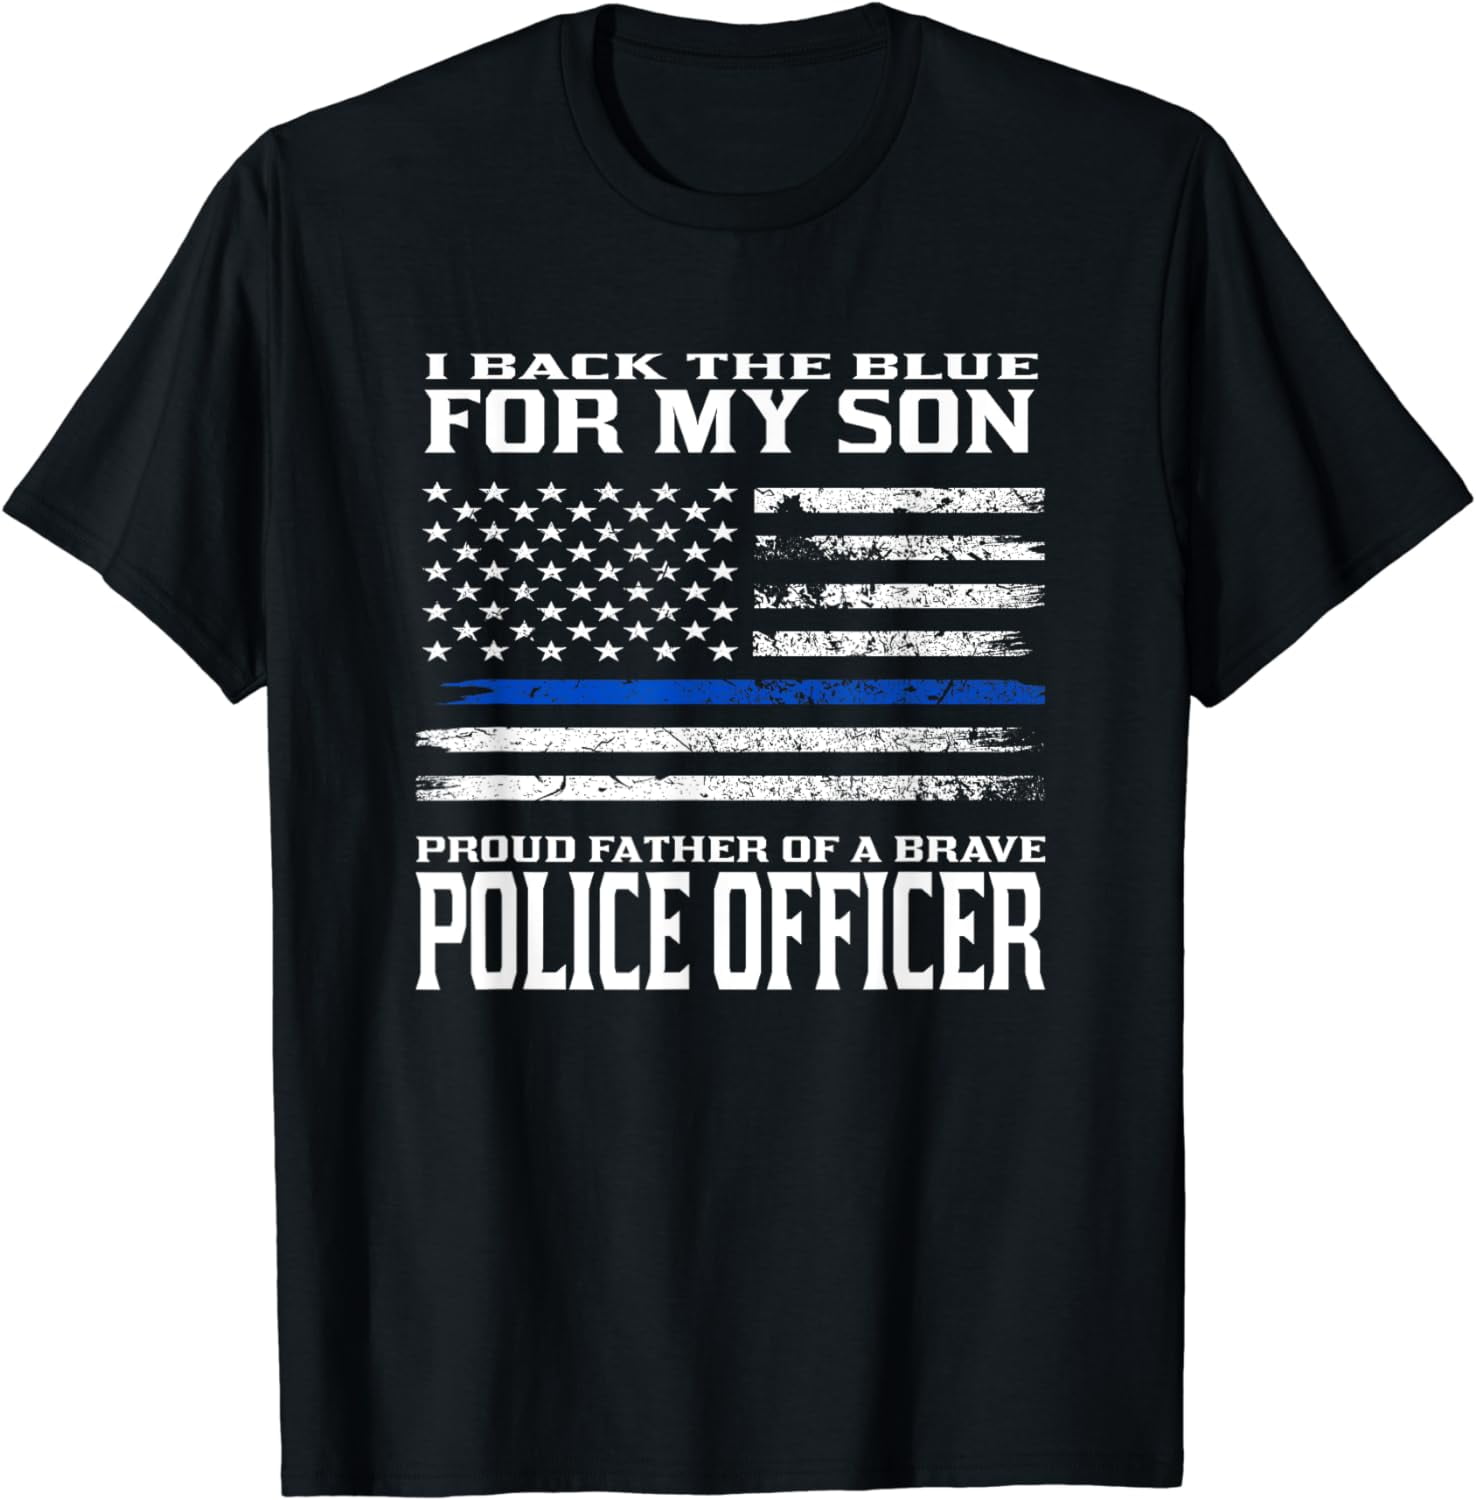 Thin Blue Line Shirt - Proud Father Of Police Officer Son - Walmart.com